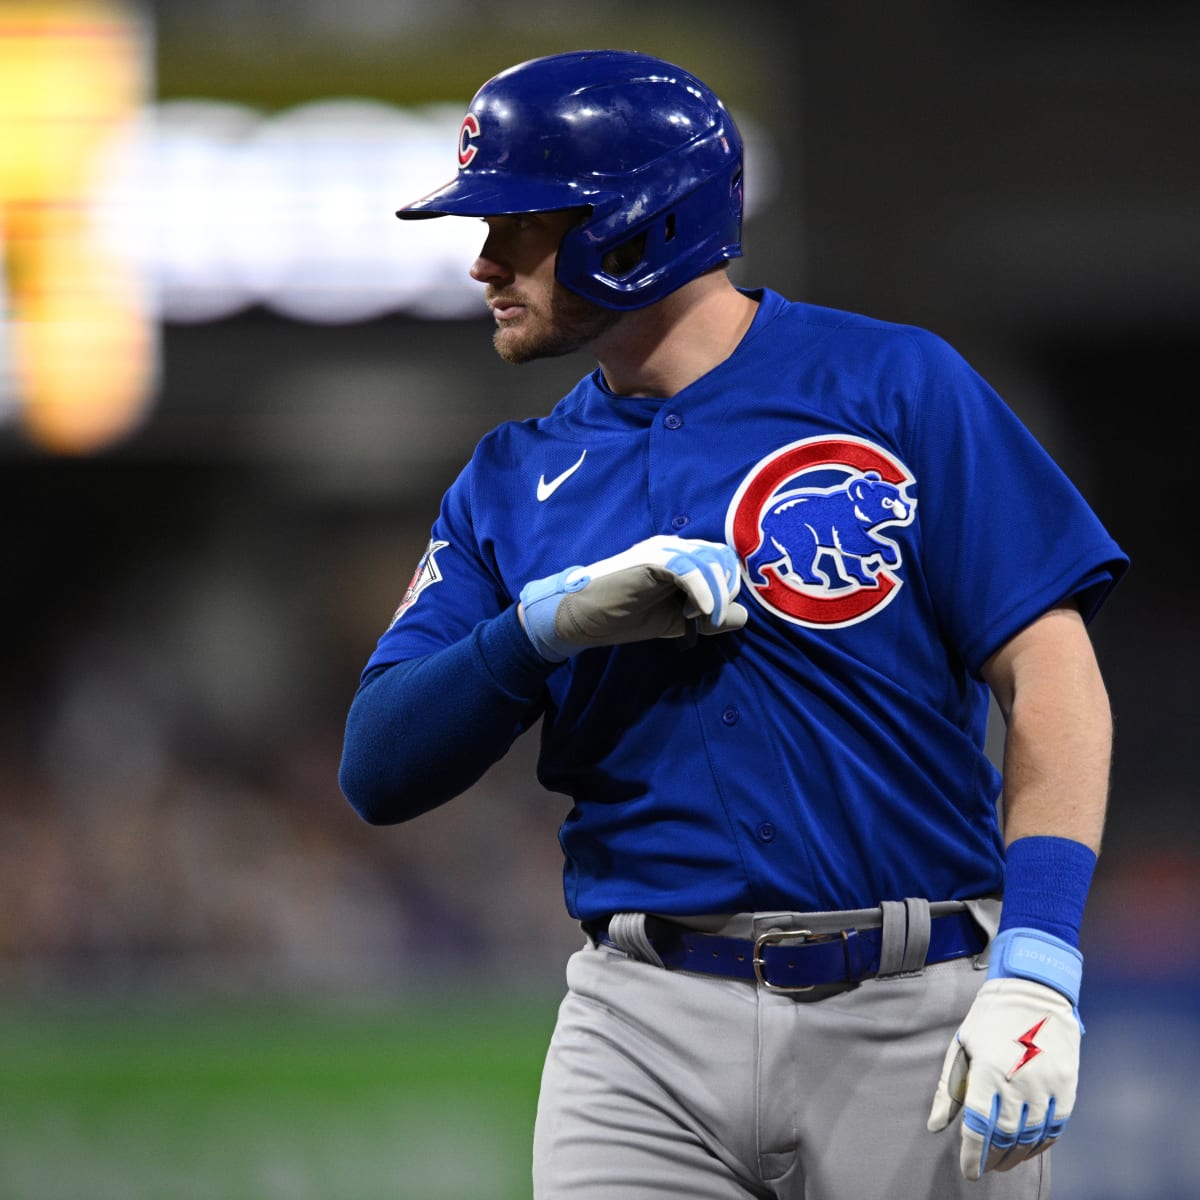 Ian Happ's journey with Cubs made him an All-Star; his career year